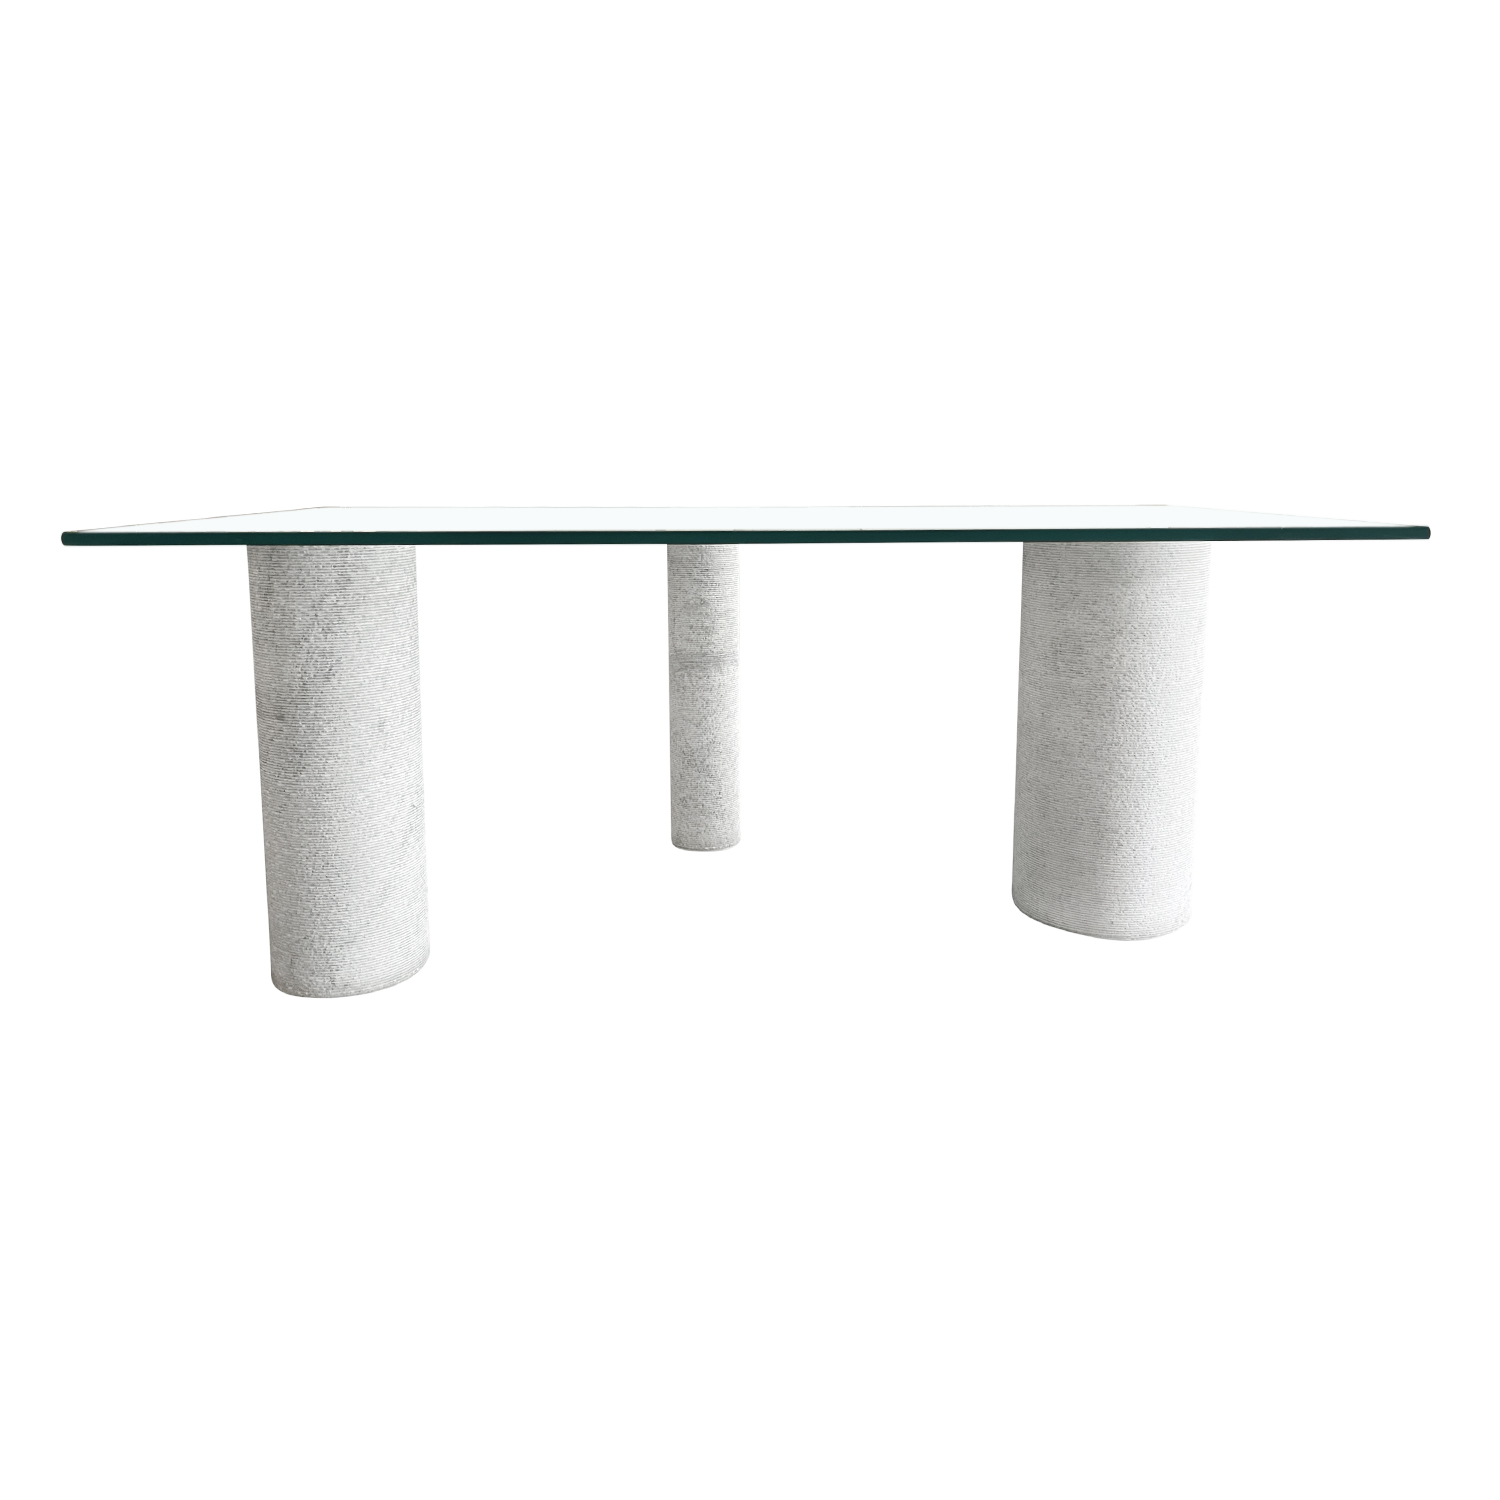 20th Century White Italian Marble, Glass Dining Room Table by Massimo Vignelli